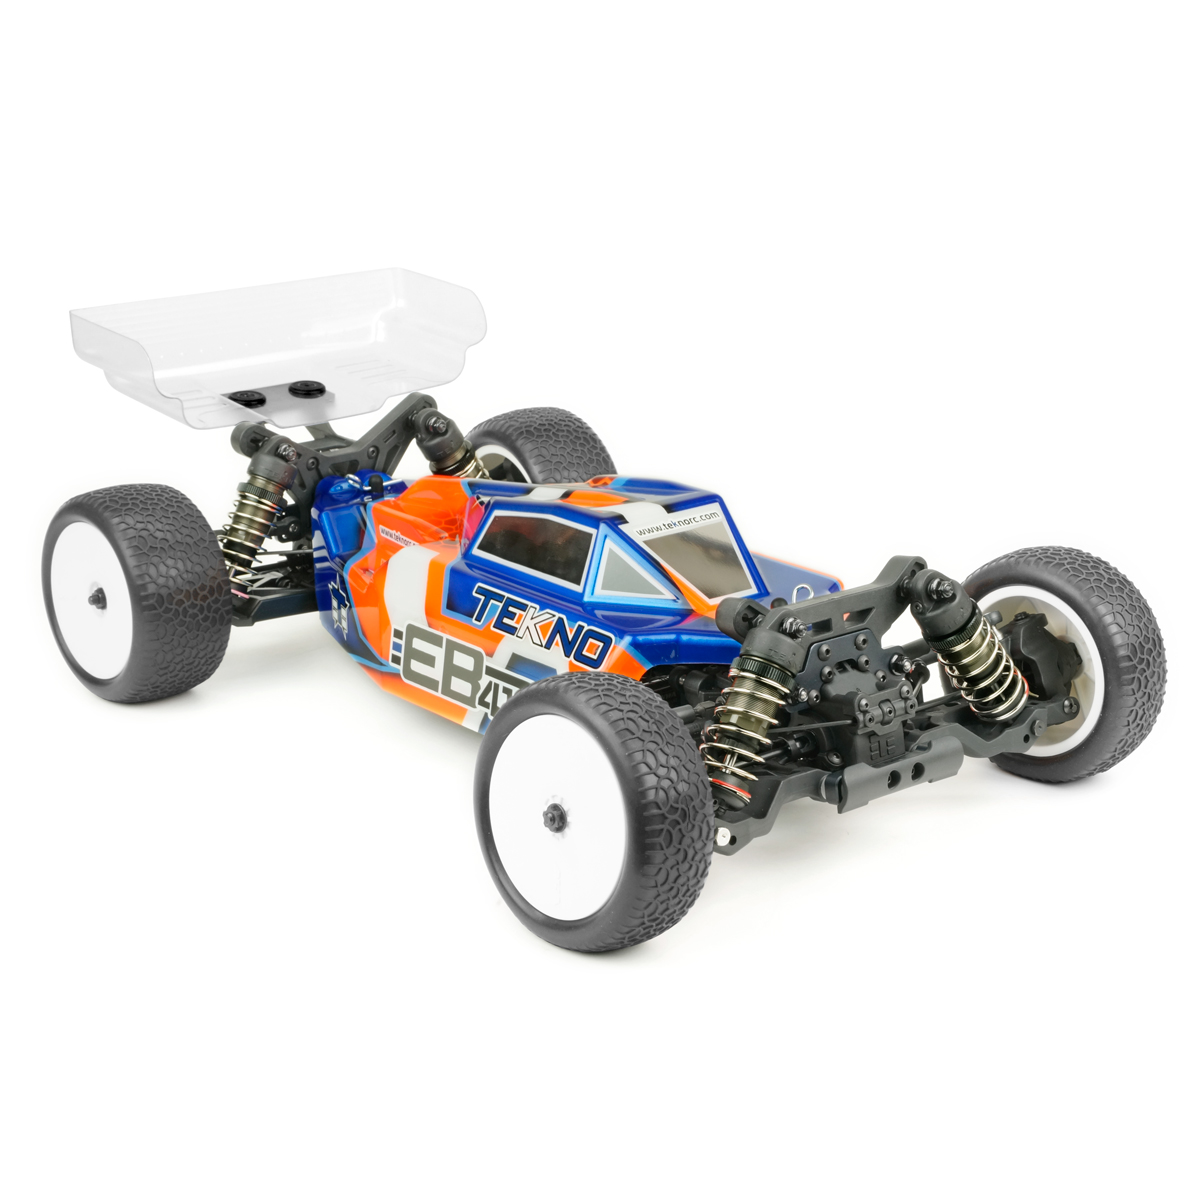 TKR6502 Tekno Eb410.2 Buggy Front and Rear Shocks for sale online 